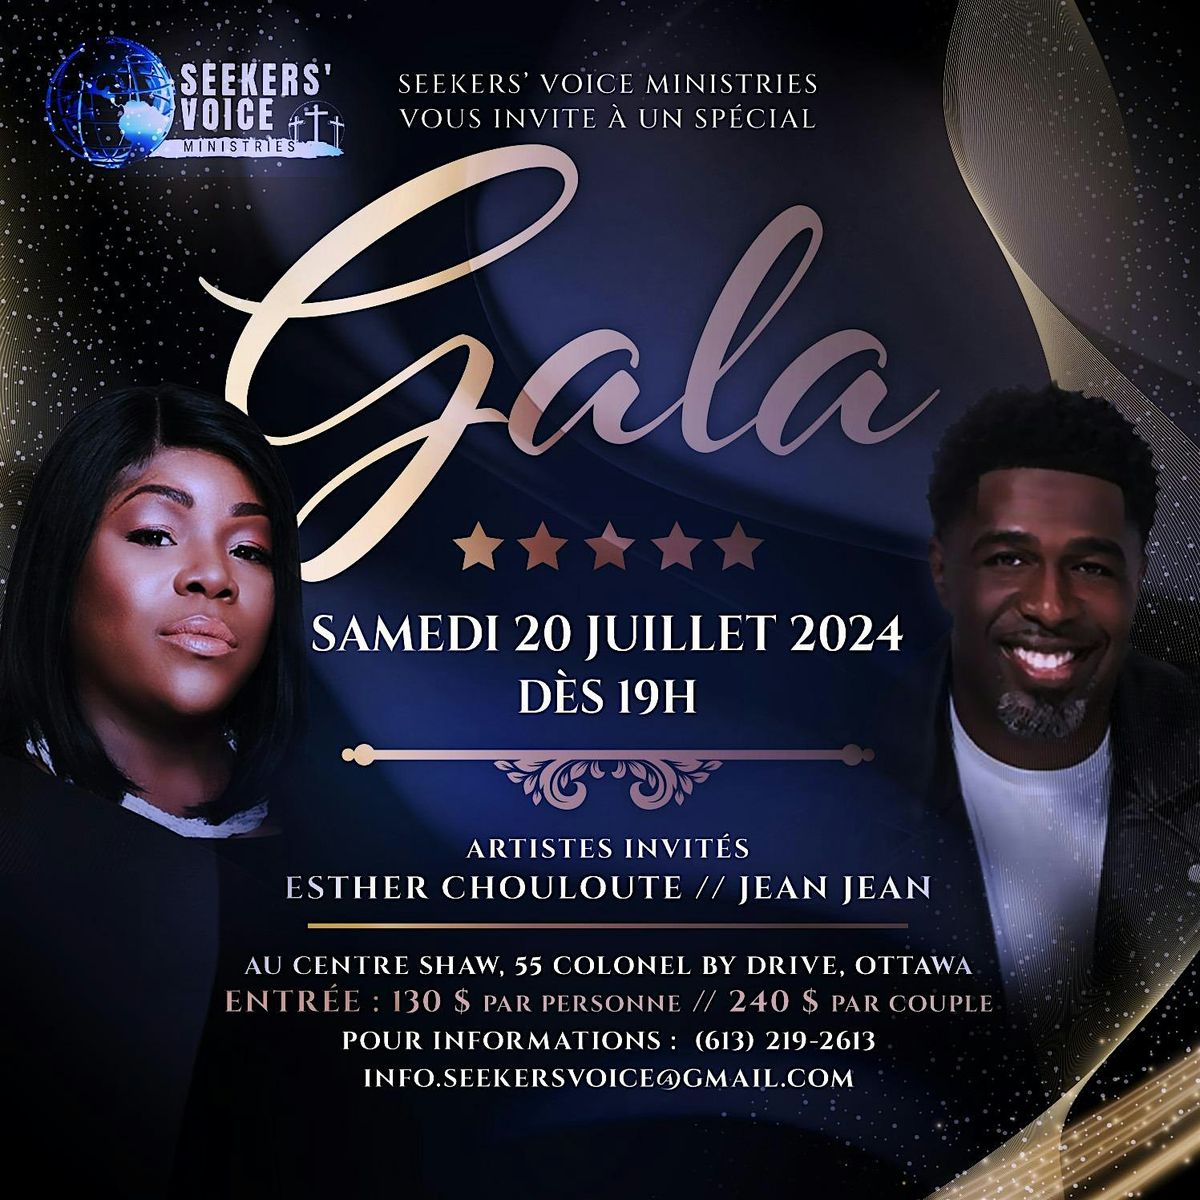 SEEKERS'VOICE MINISTRY GALA 2024